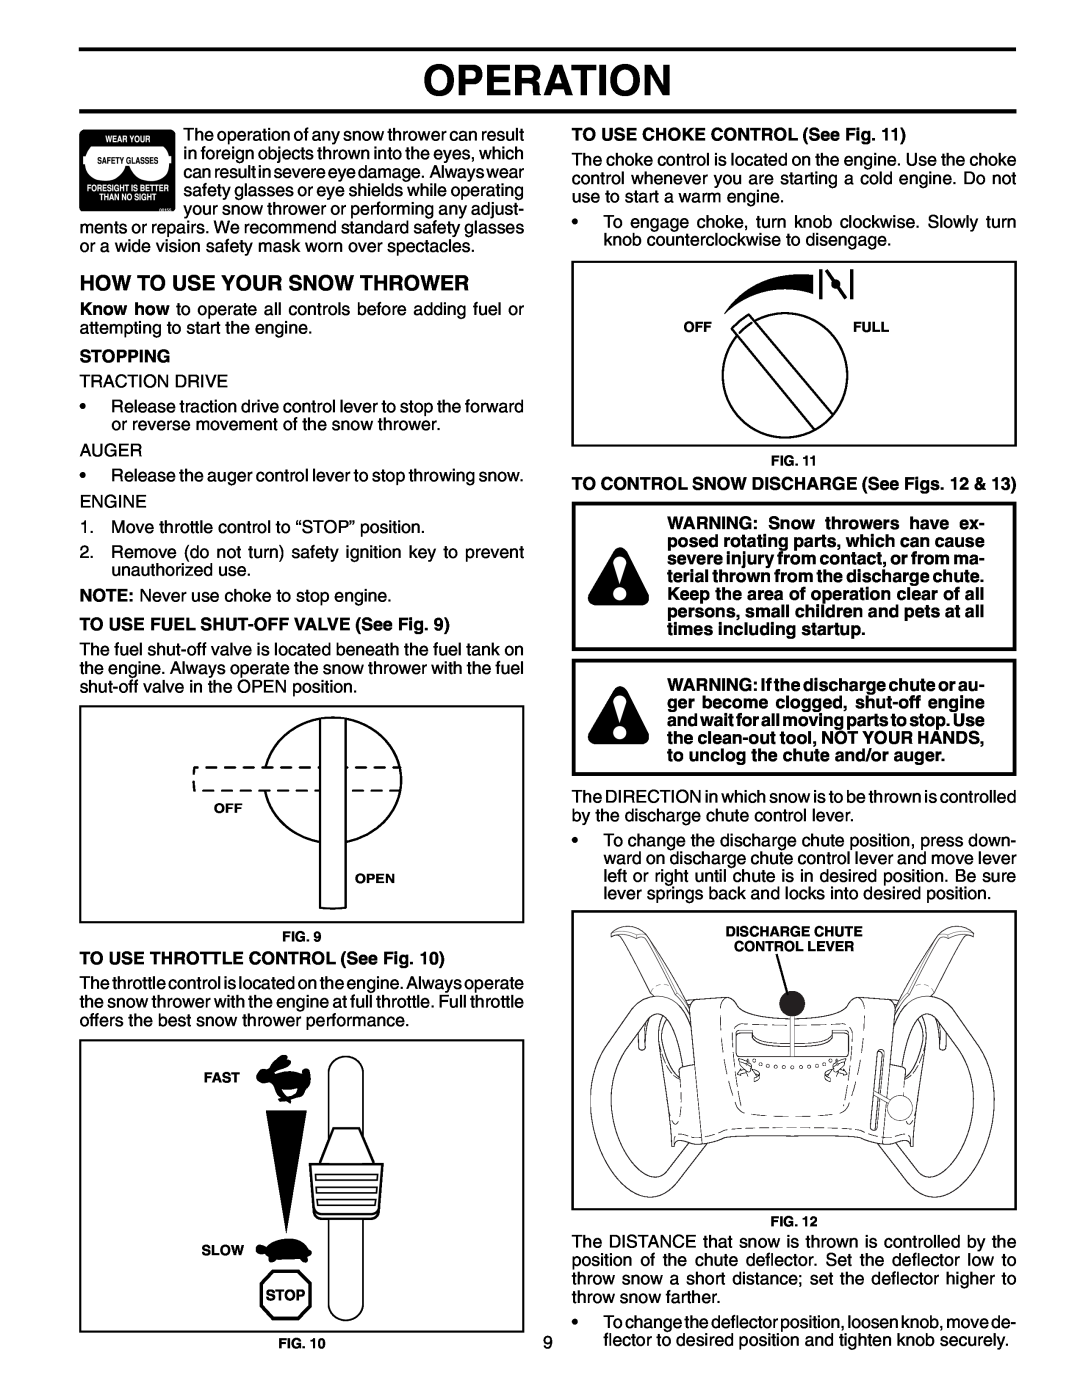 Poulan 199350 owner manual How To Use Your Snow Thrower, Operation, TO USE CHOKE CONTROL See Fig, Stopping 